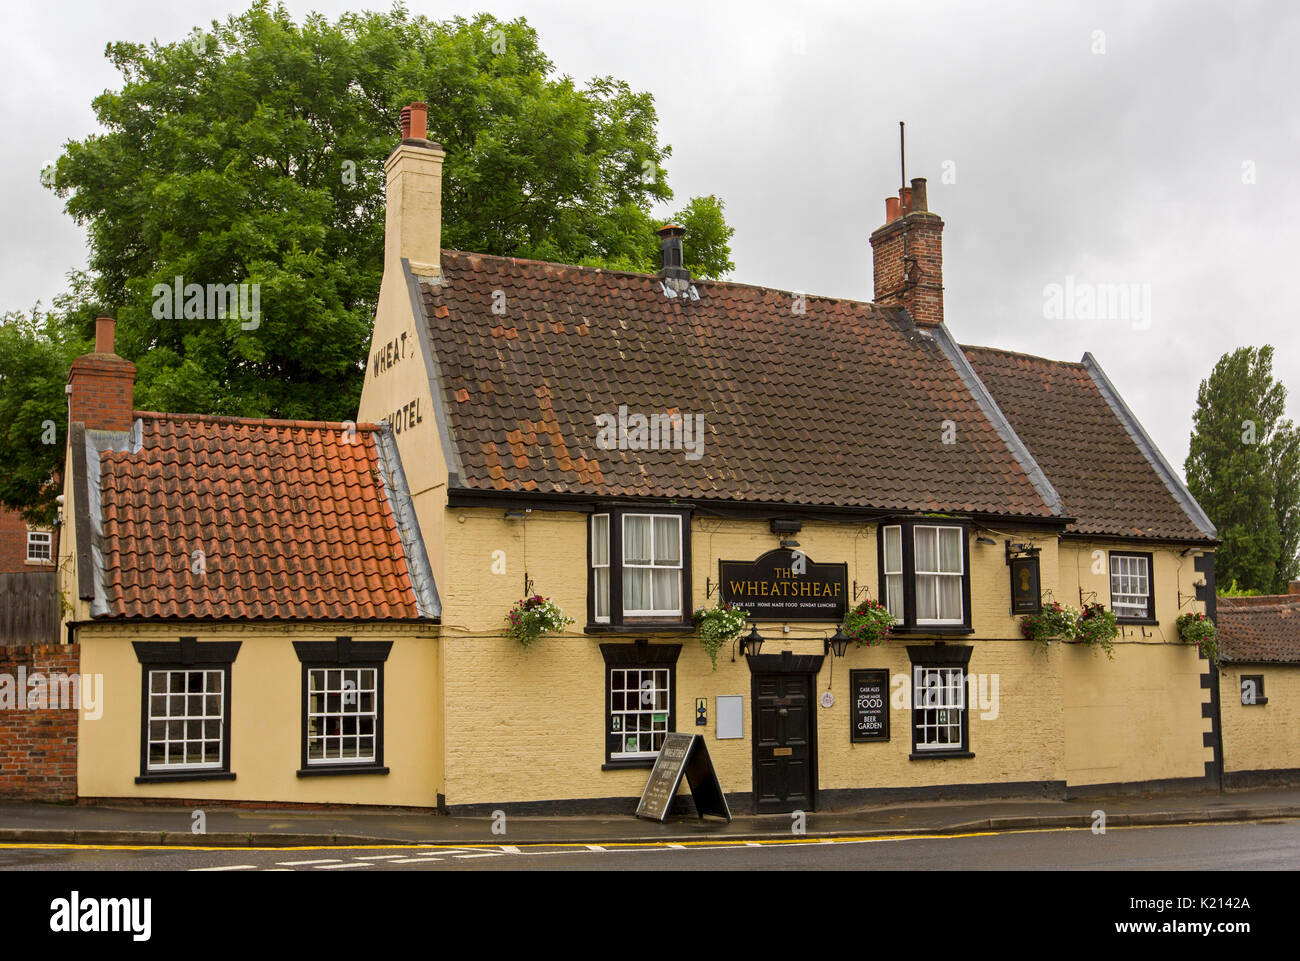 Colourful Wheat Sheaf pub with apricot yellow walls and red tiled roof in Barton-upon-Humber, Lincolnshire, England Stock Photo